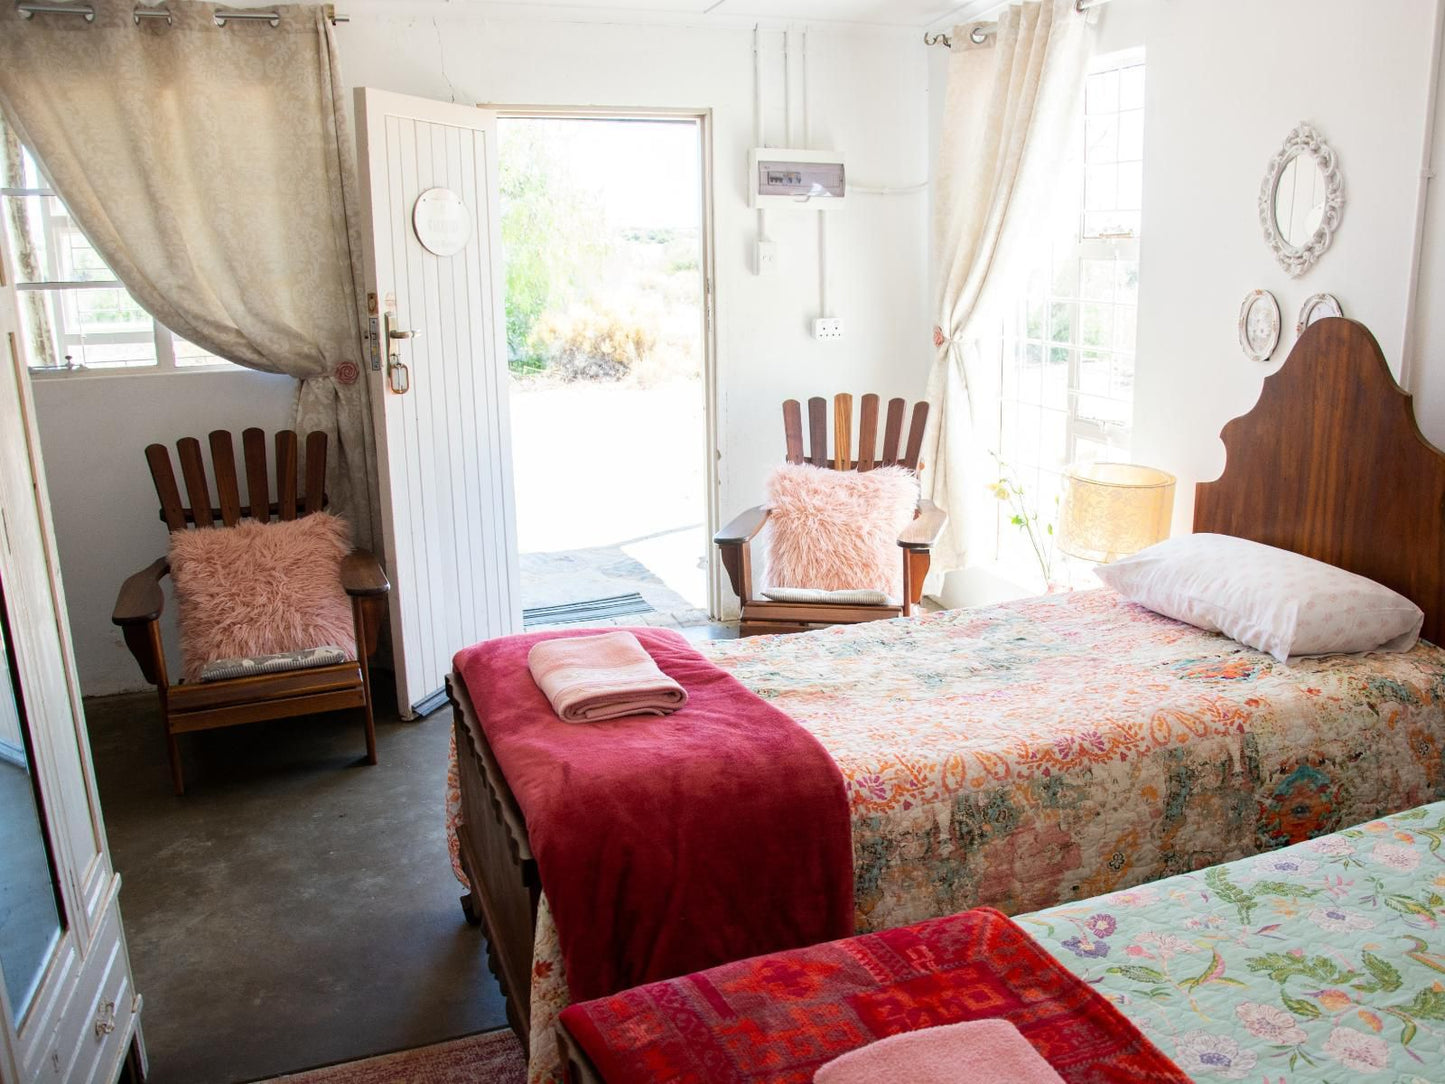 Willemsrivier Trekpad Guest Houses Nieuwoudtville Northern Cape South Africa Bedroom